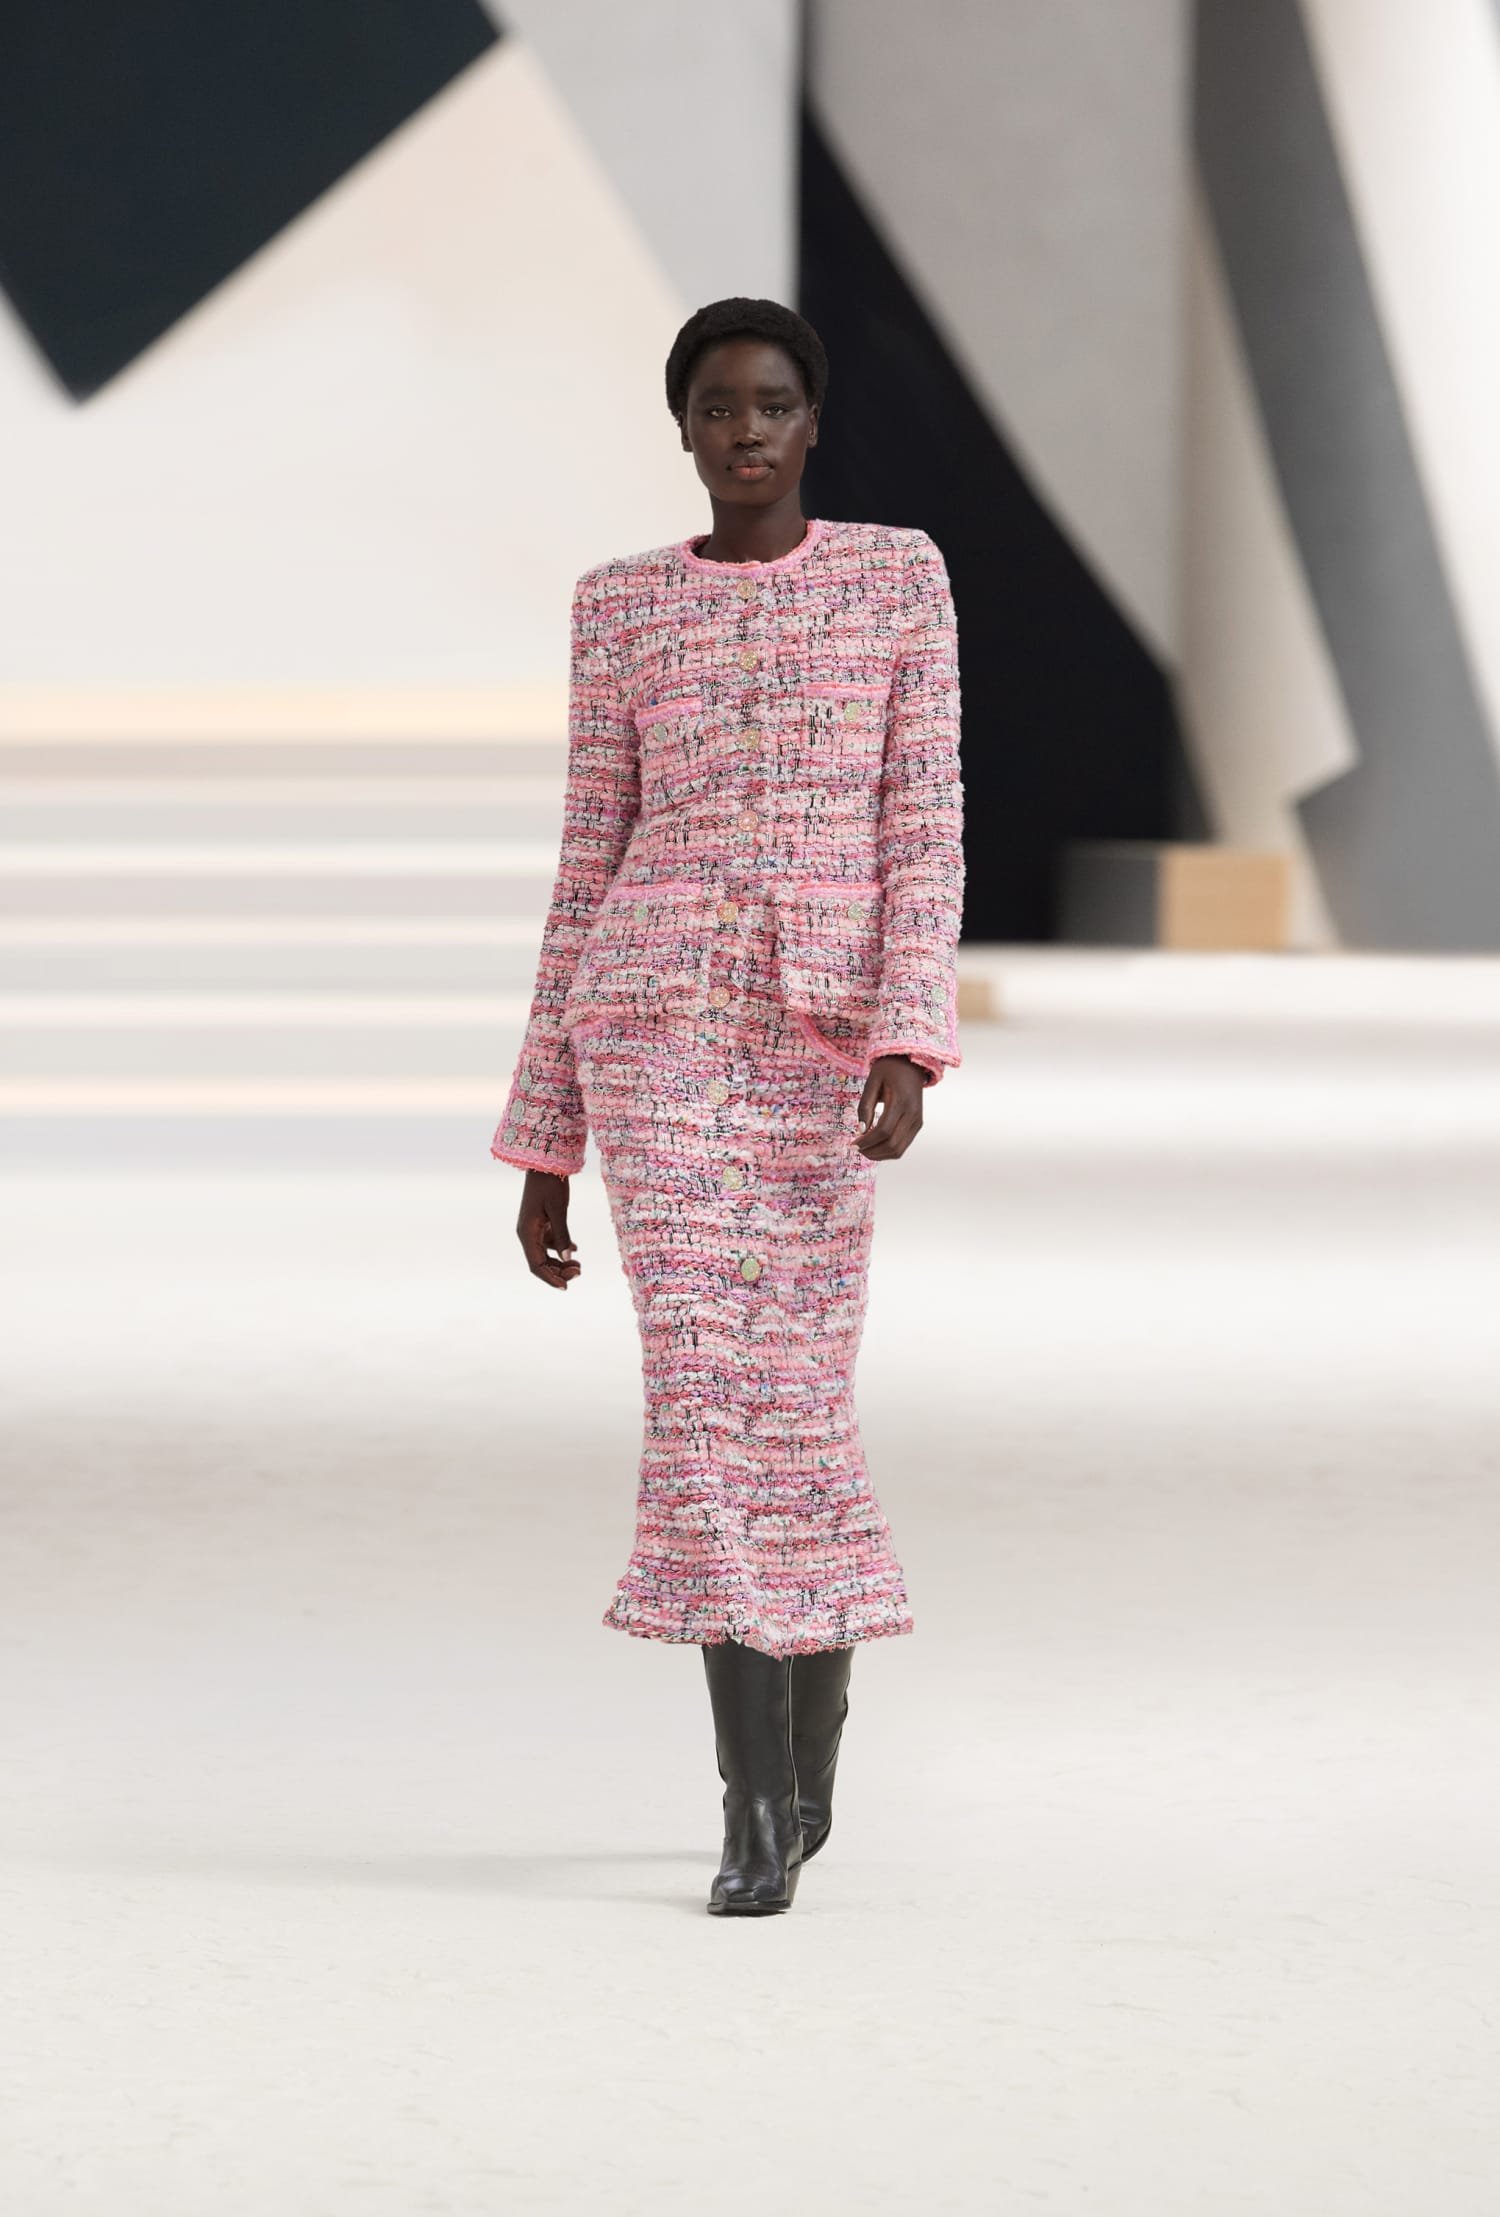 Haute Couture Fall 2022: Chanel's 1930s inspirations — CoutureNotebook